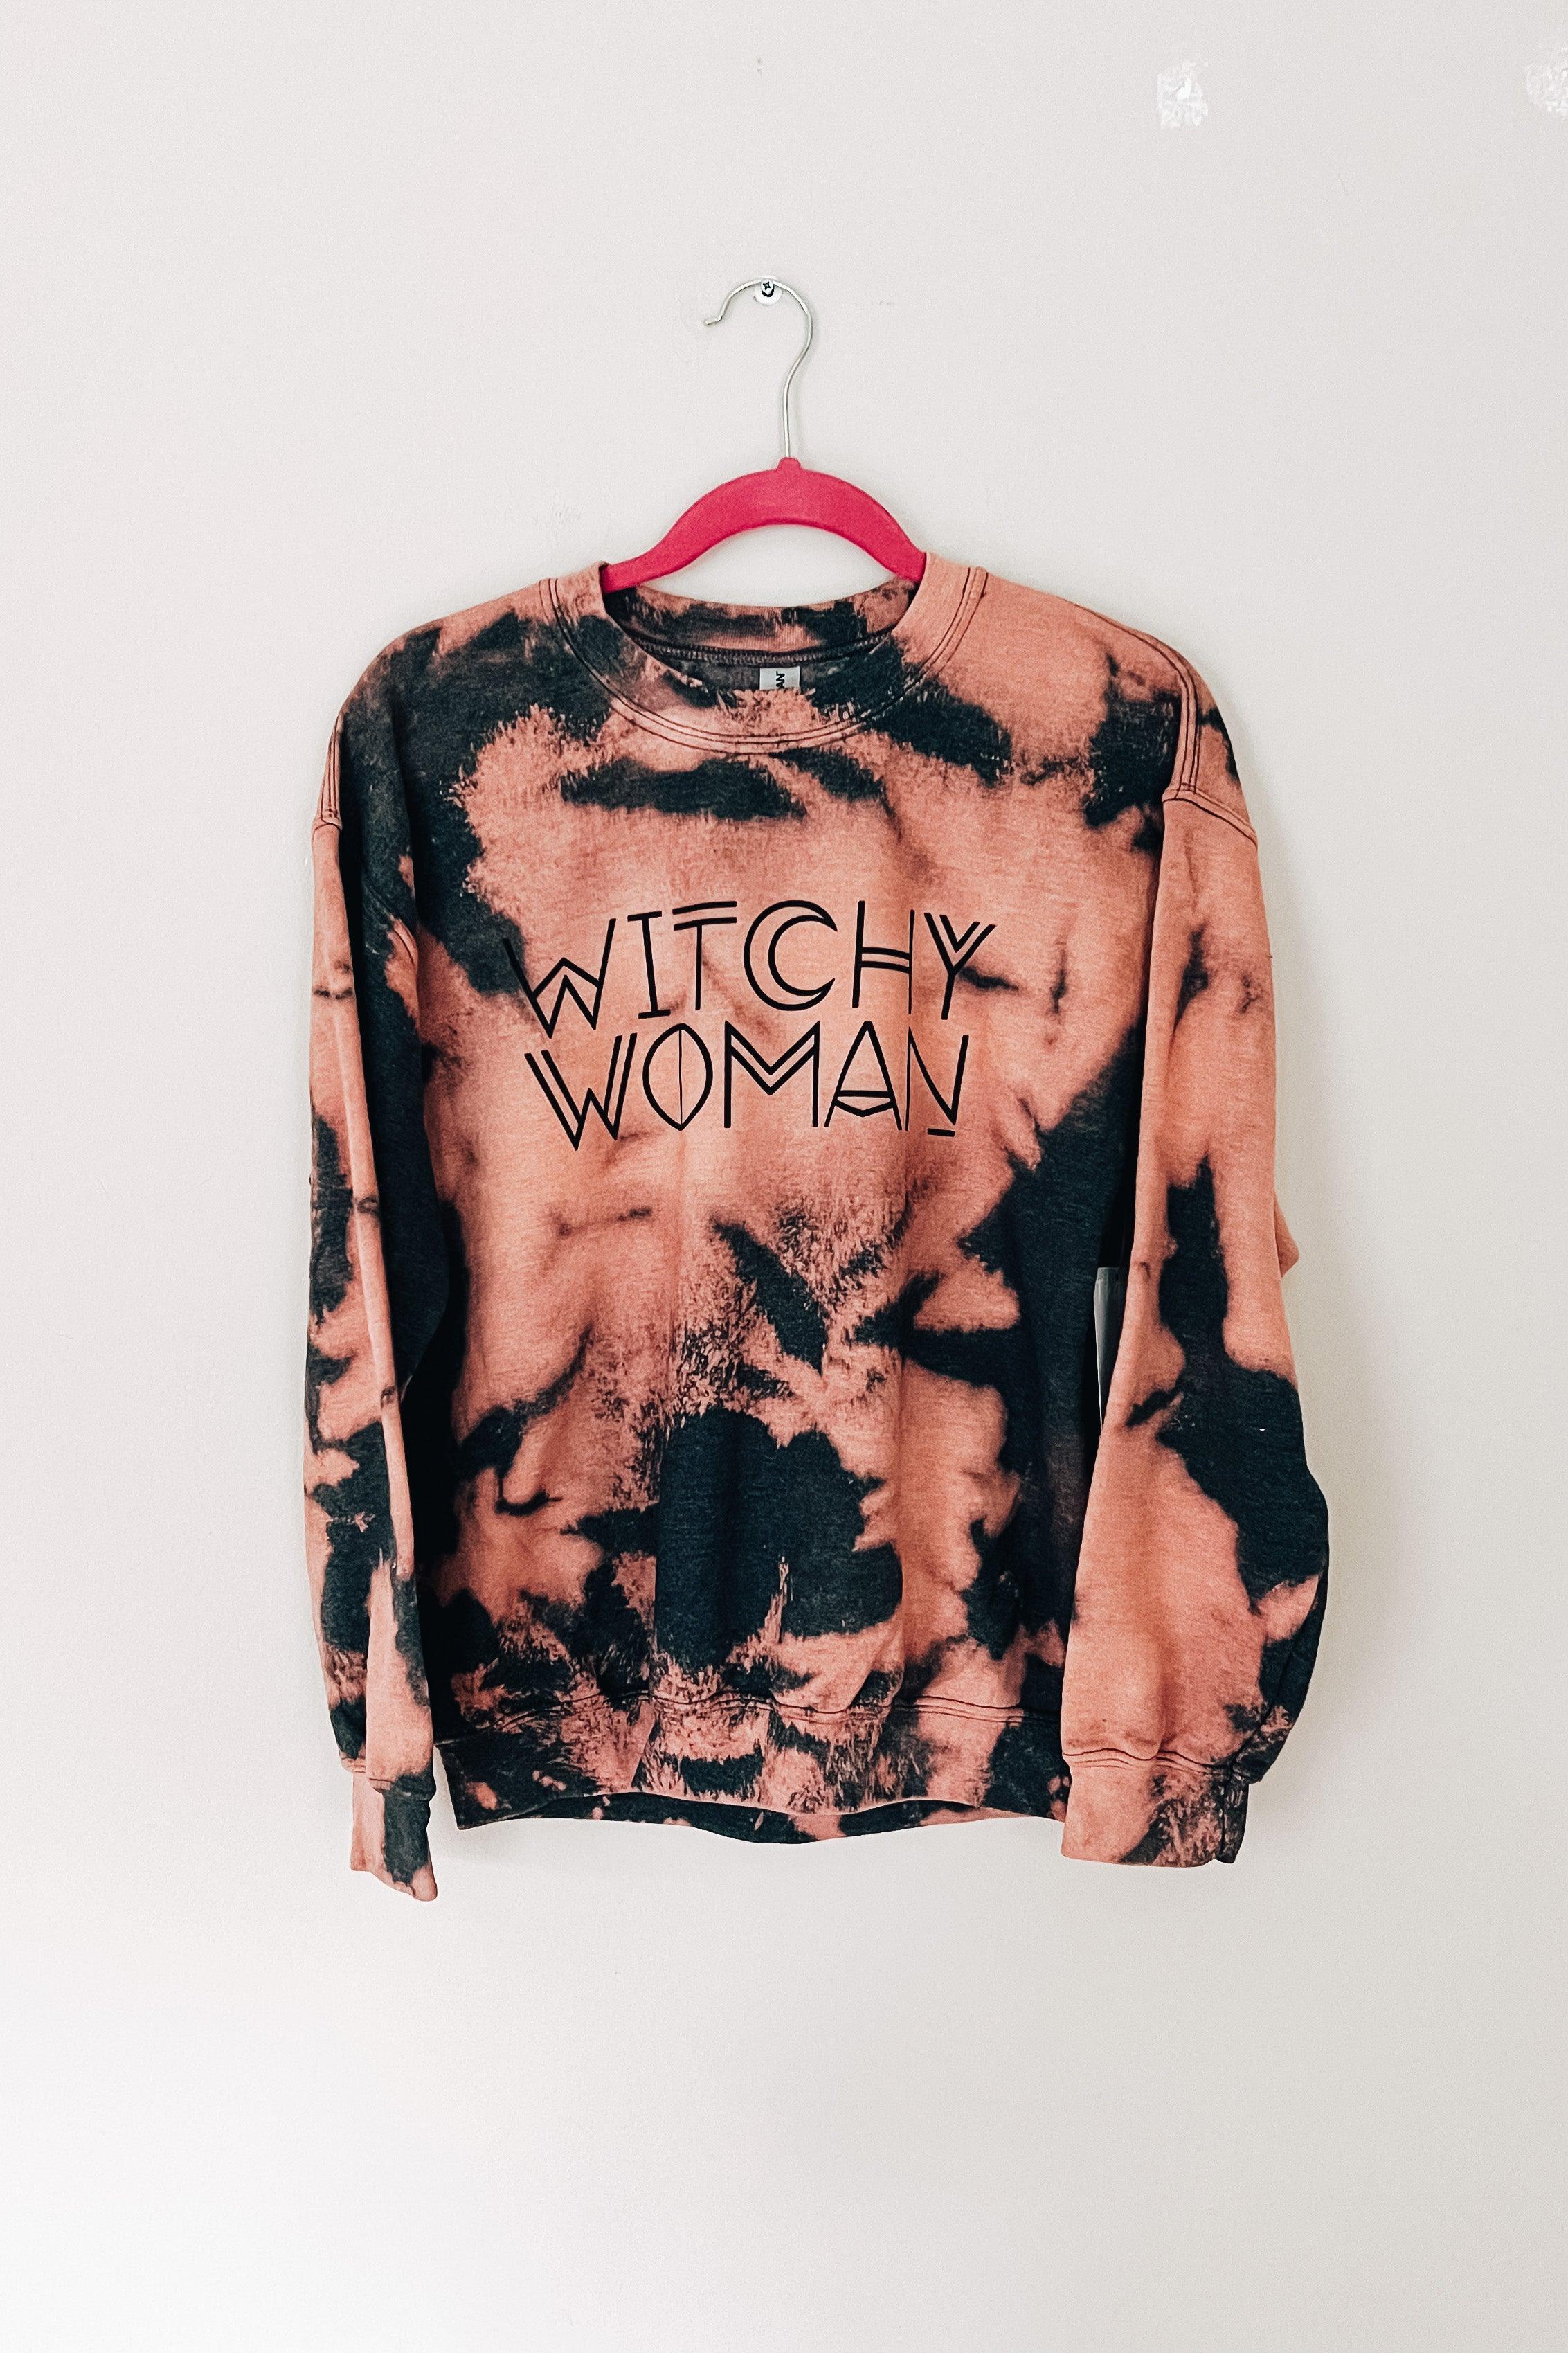 Witchy Woman Bleached Sweatshirt - Atomic Wildflower